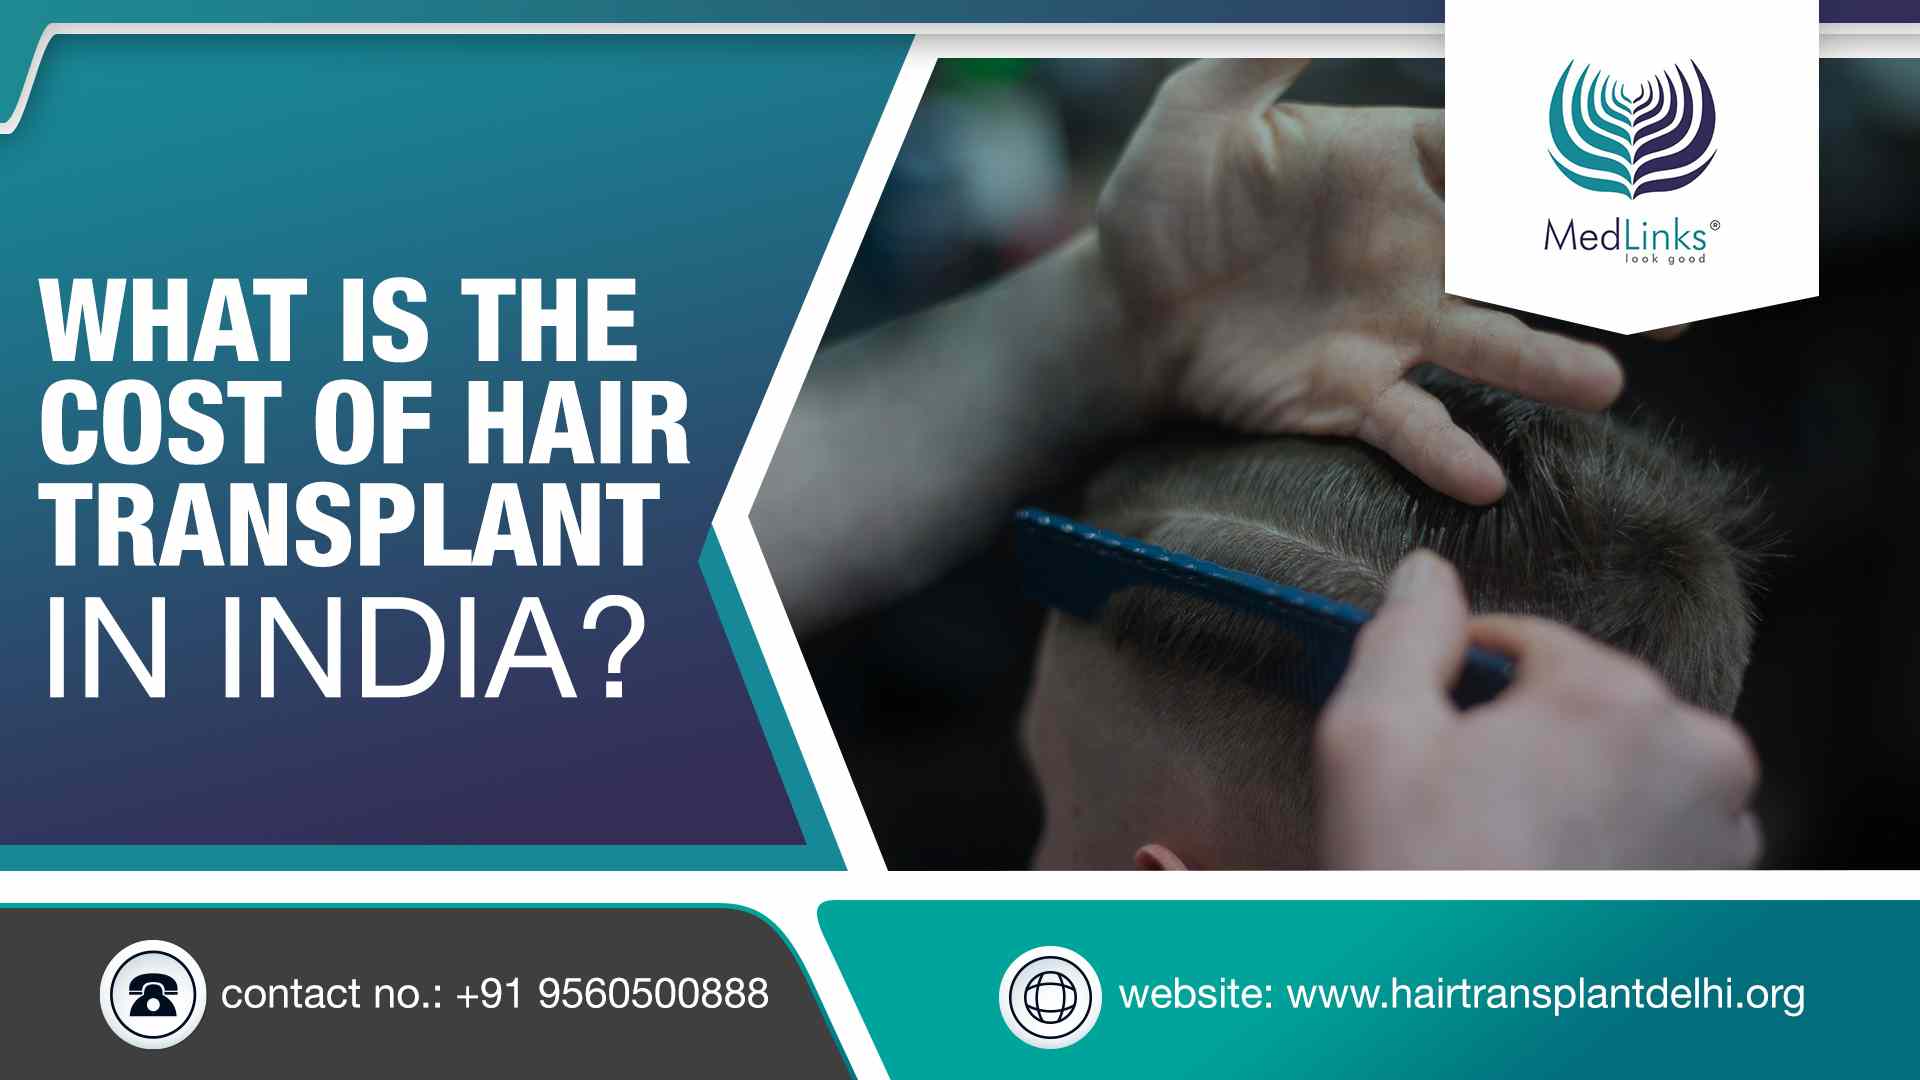 What is the Cost of Hair Transplant in India?